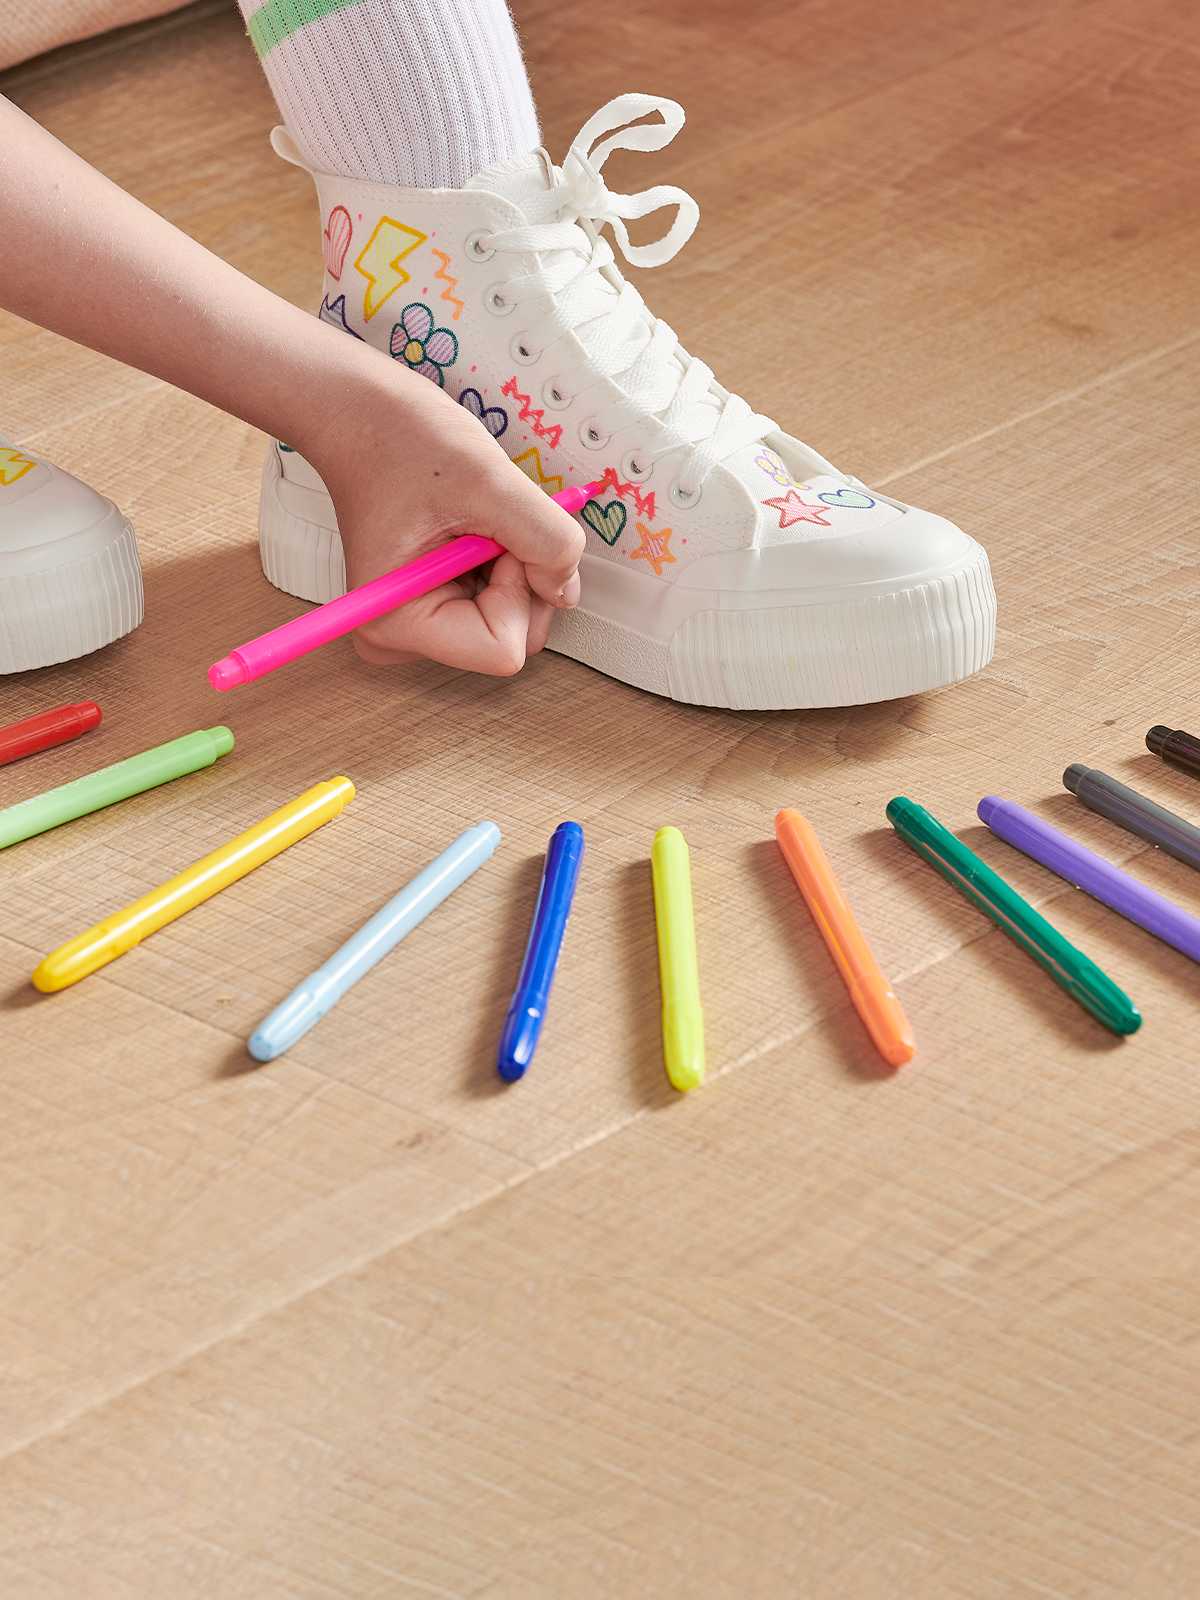 ooly Left/Right ergonomic crayons – Mudpuddles Toy Store